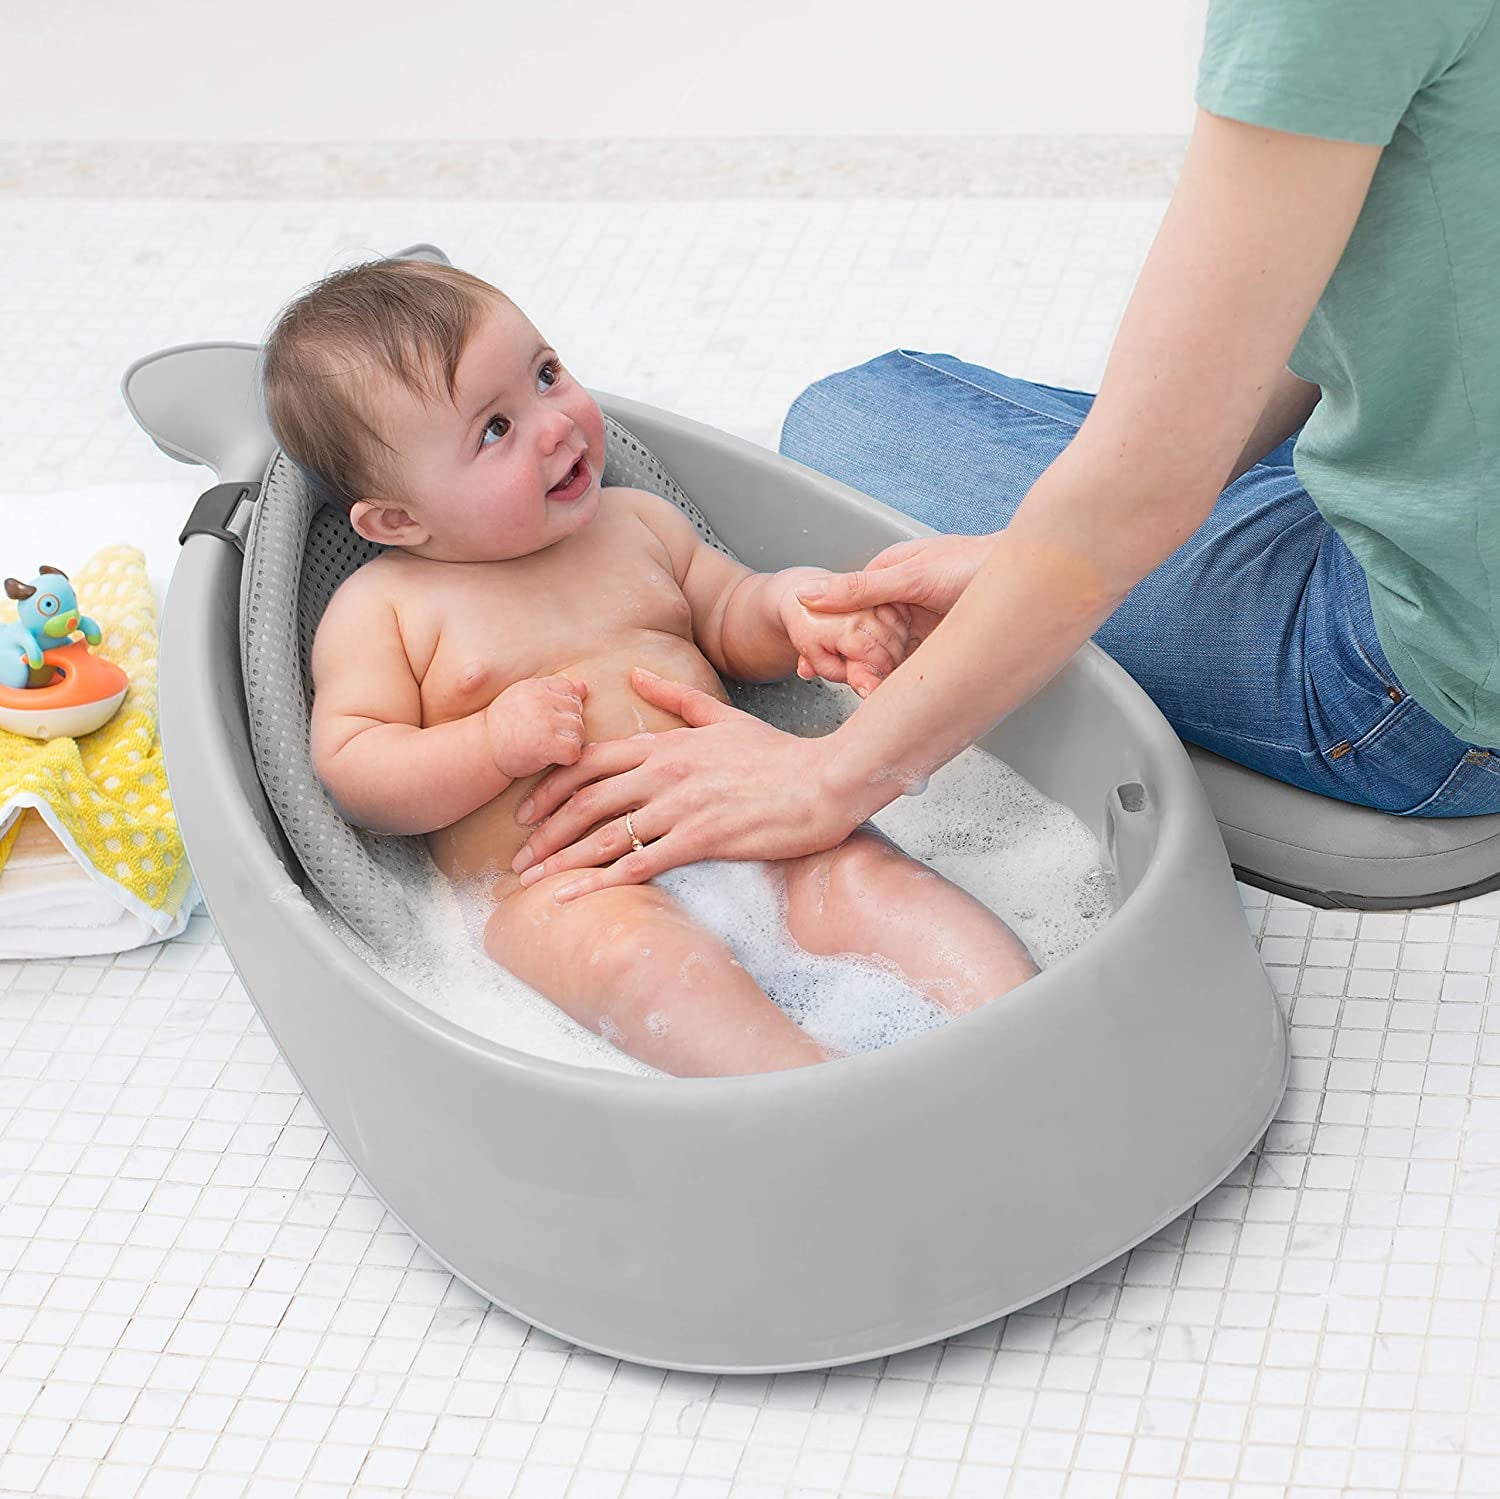 A baby taking a bath in the gray whale tub